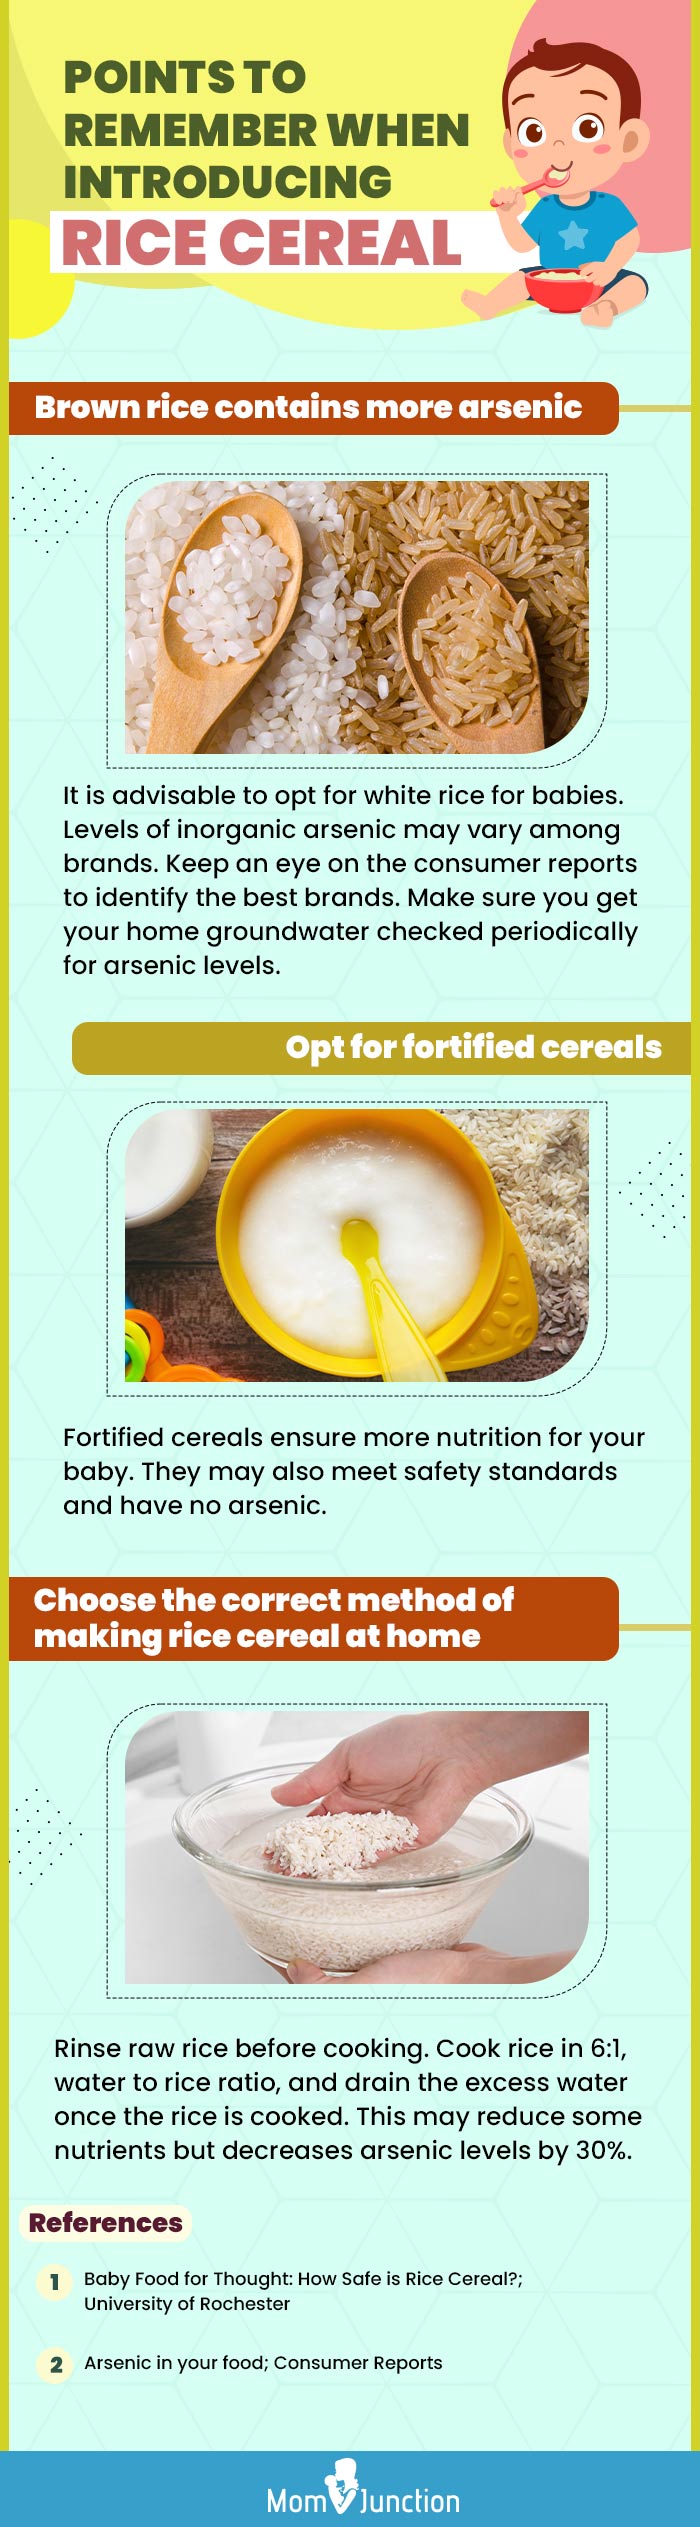 what else to know when introducing rice cereal to babies [infographic]